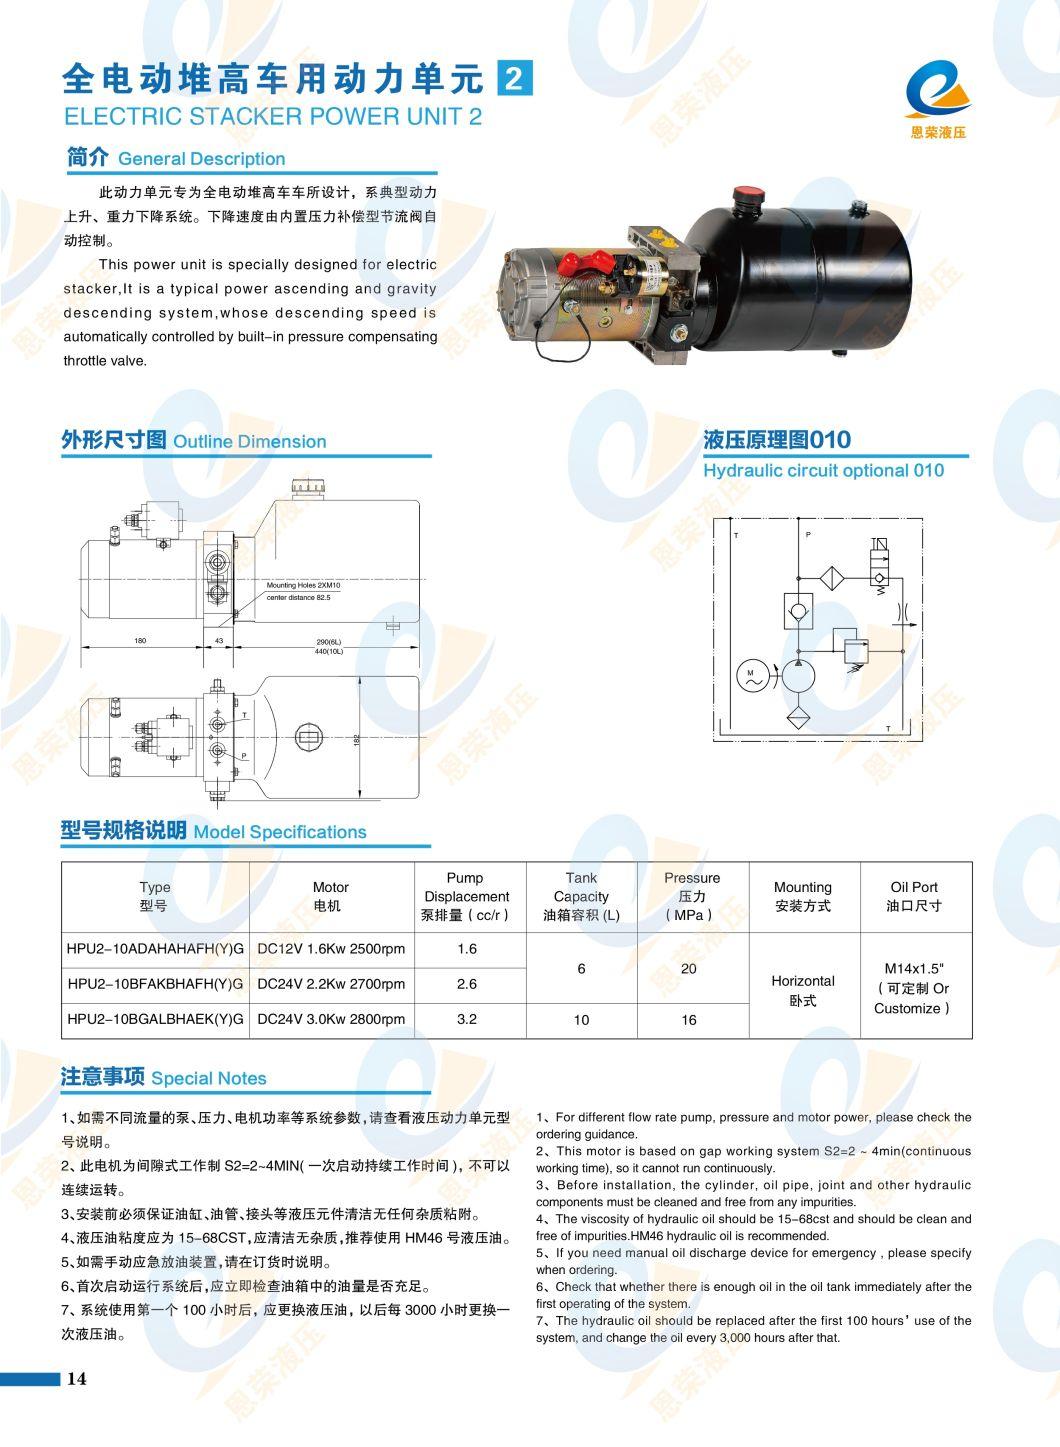 Hydraulic Power Unit of Single Acting Dump Truck for Tipping Dump Truck